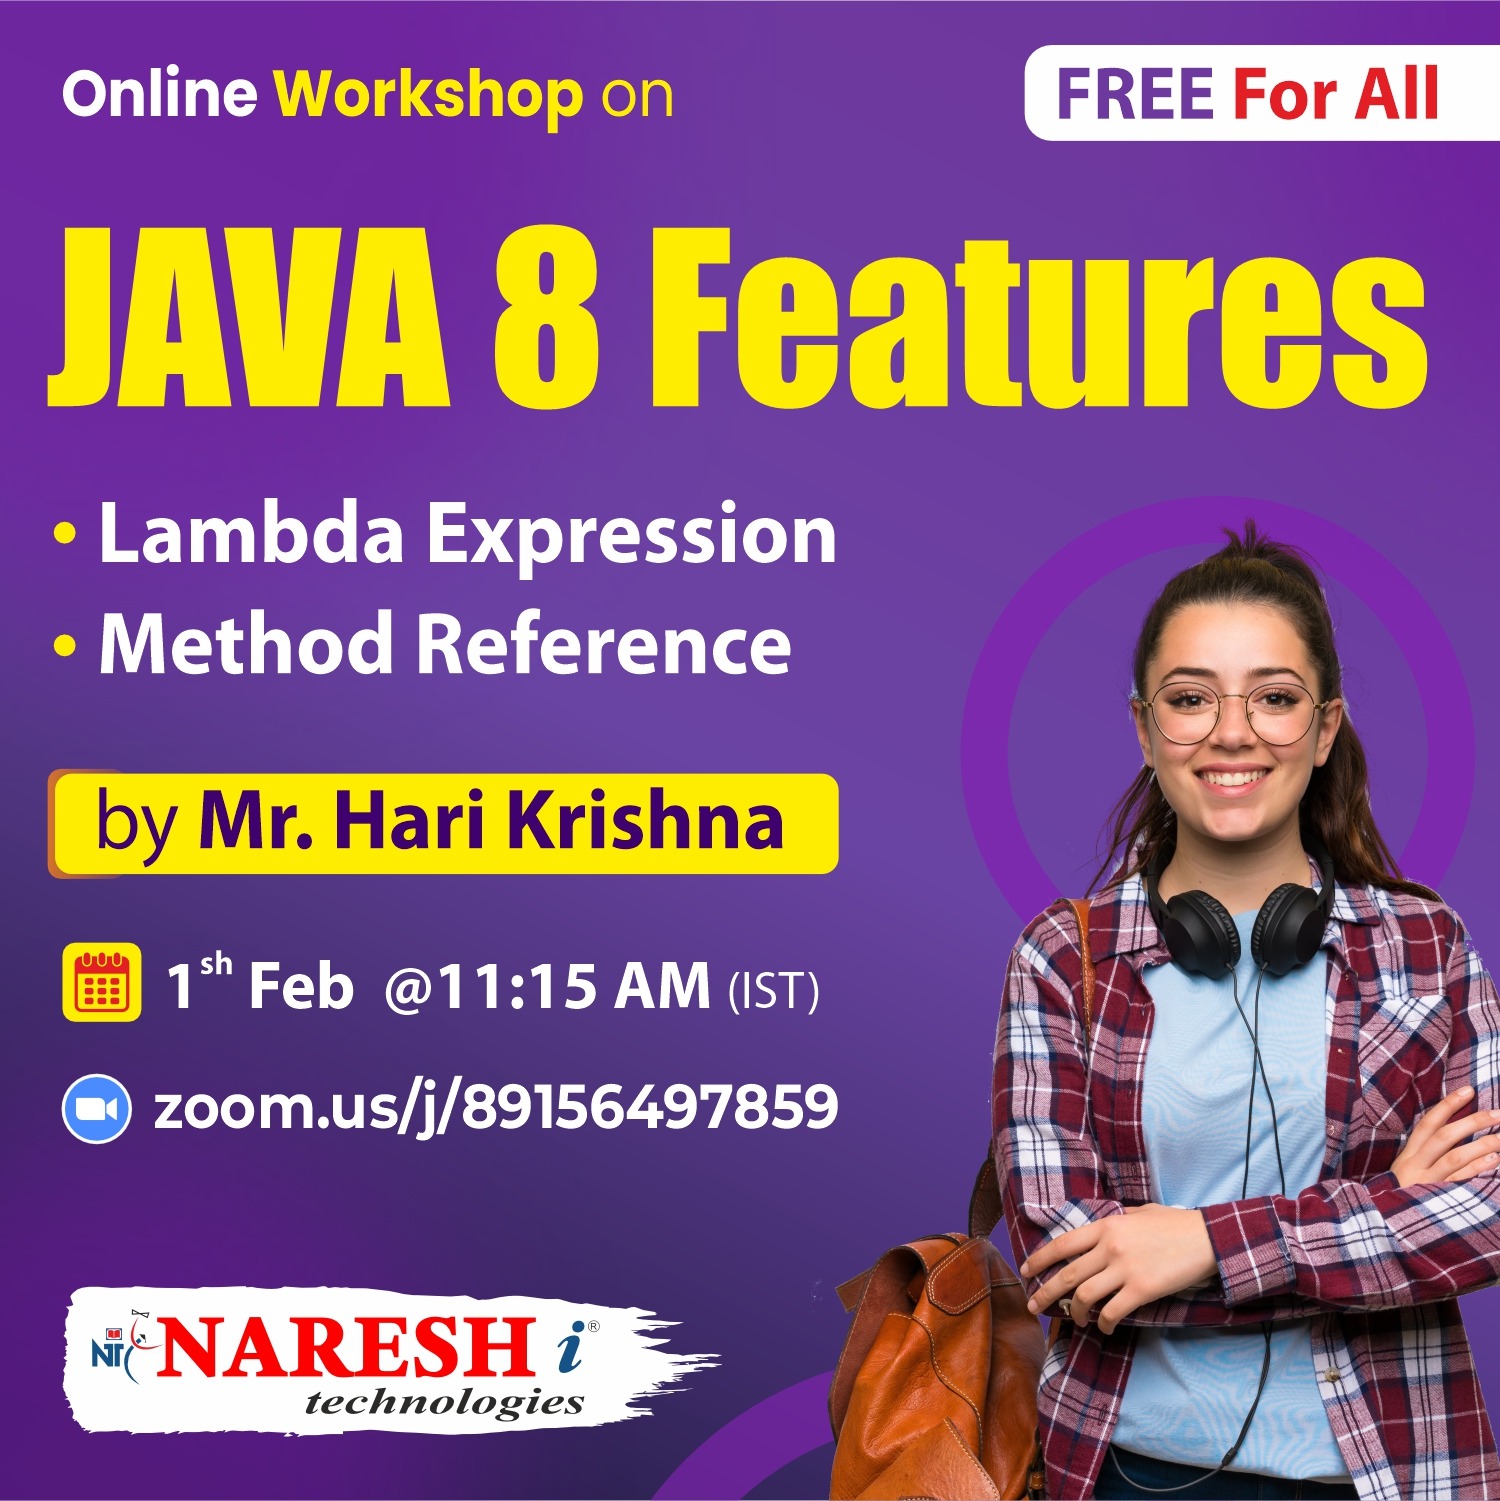 Free Online Workshop on Java 8 Features in NareshIT, Online Event